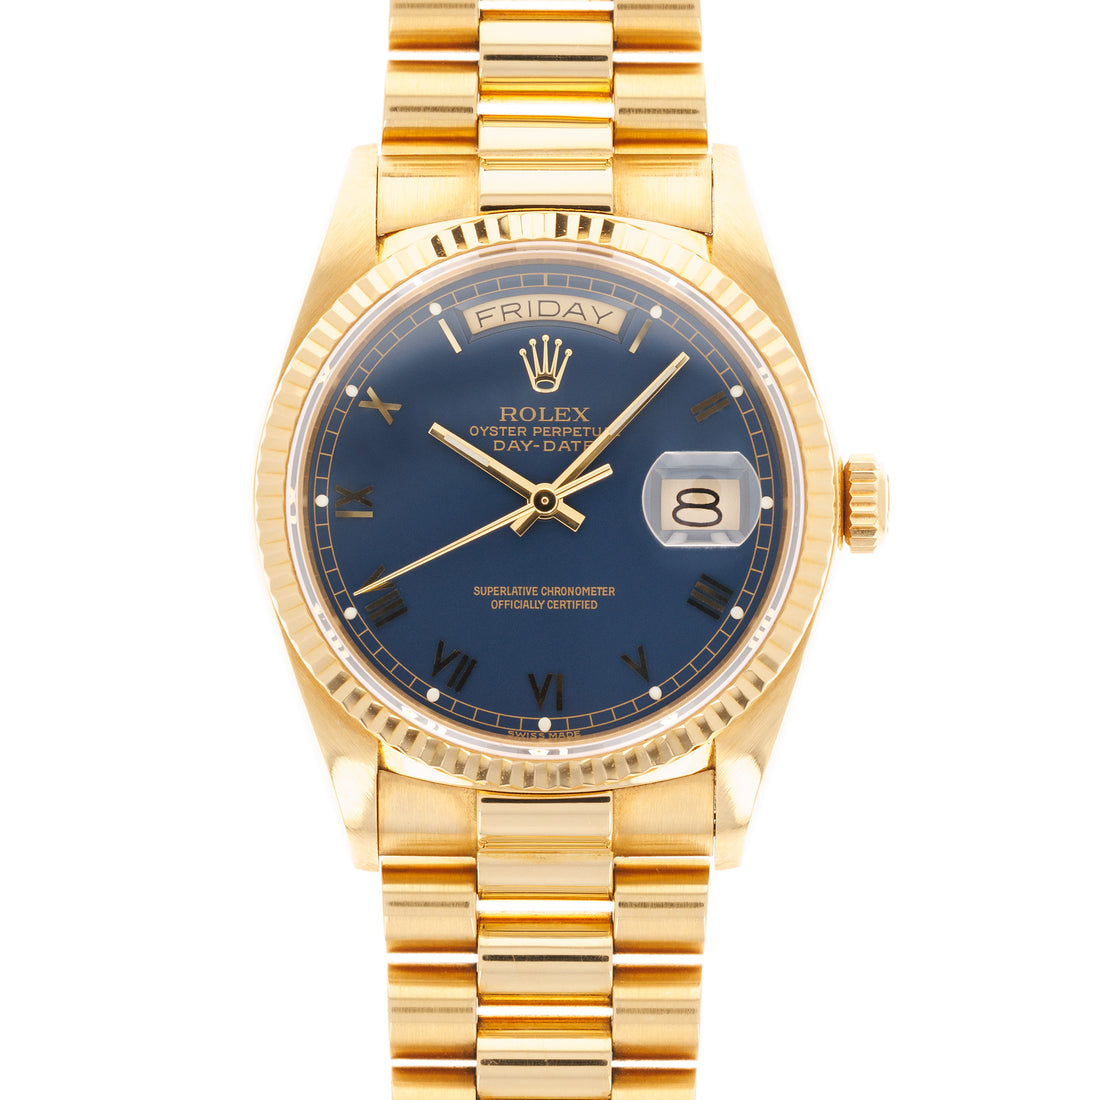 Rolex Yellow Gold Day-Date Ref. 18038 with Blue Dial